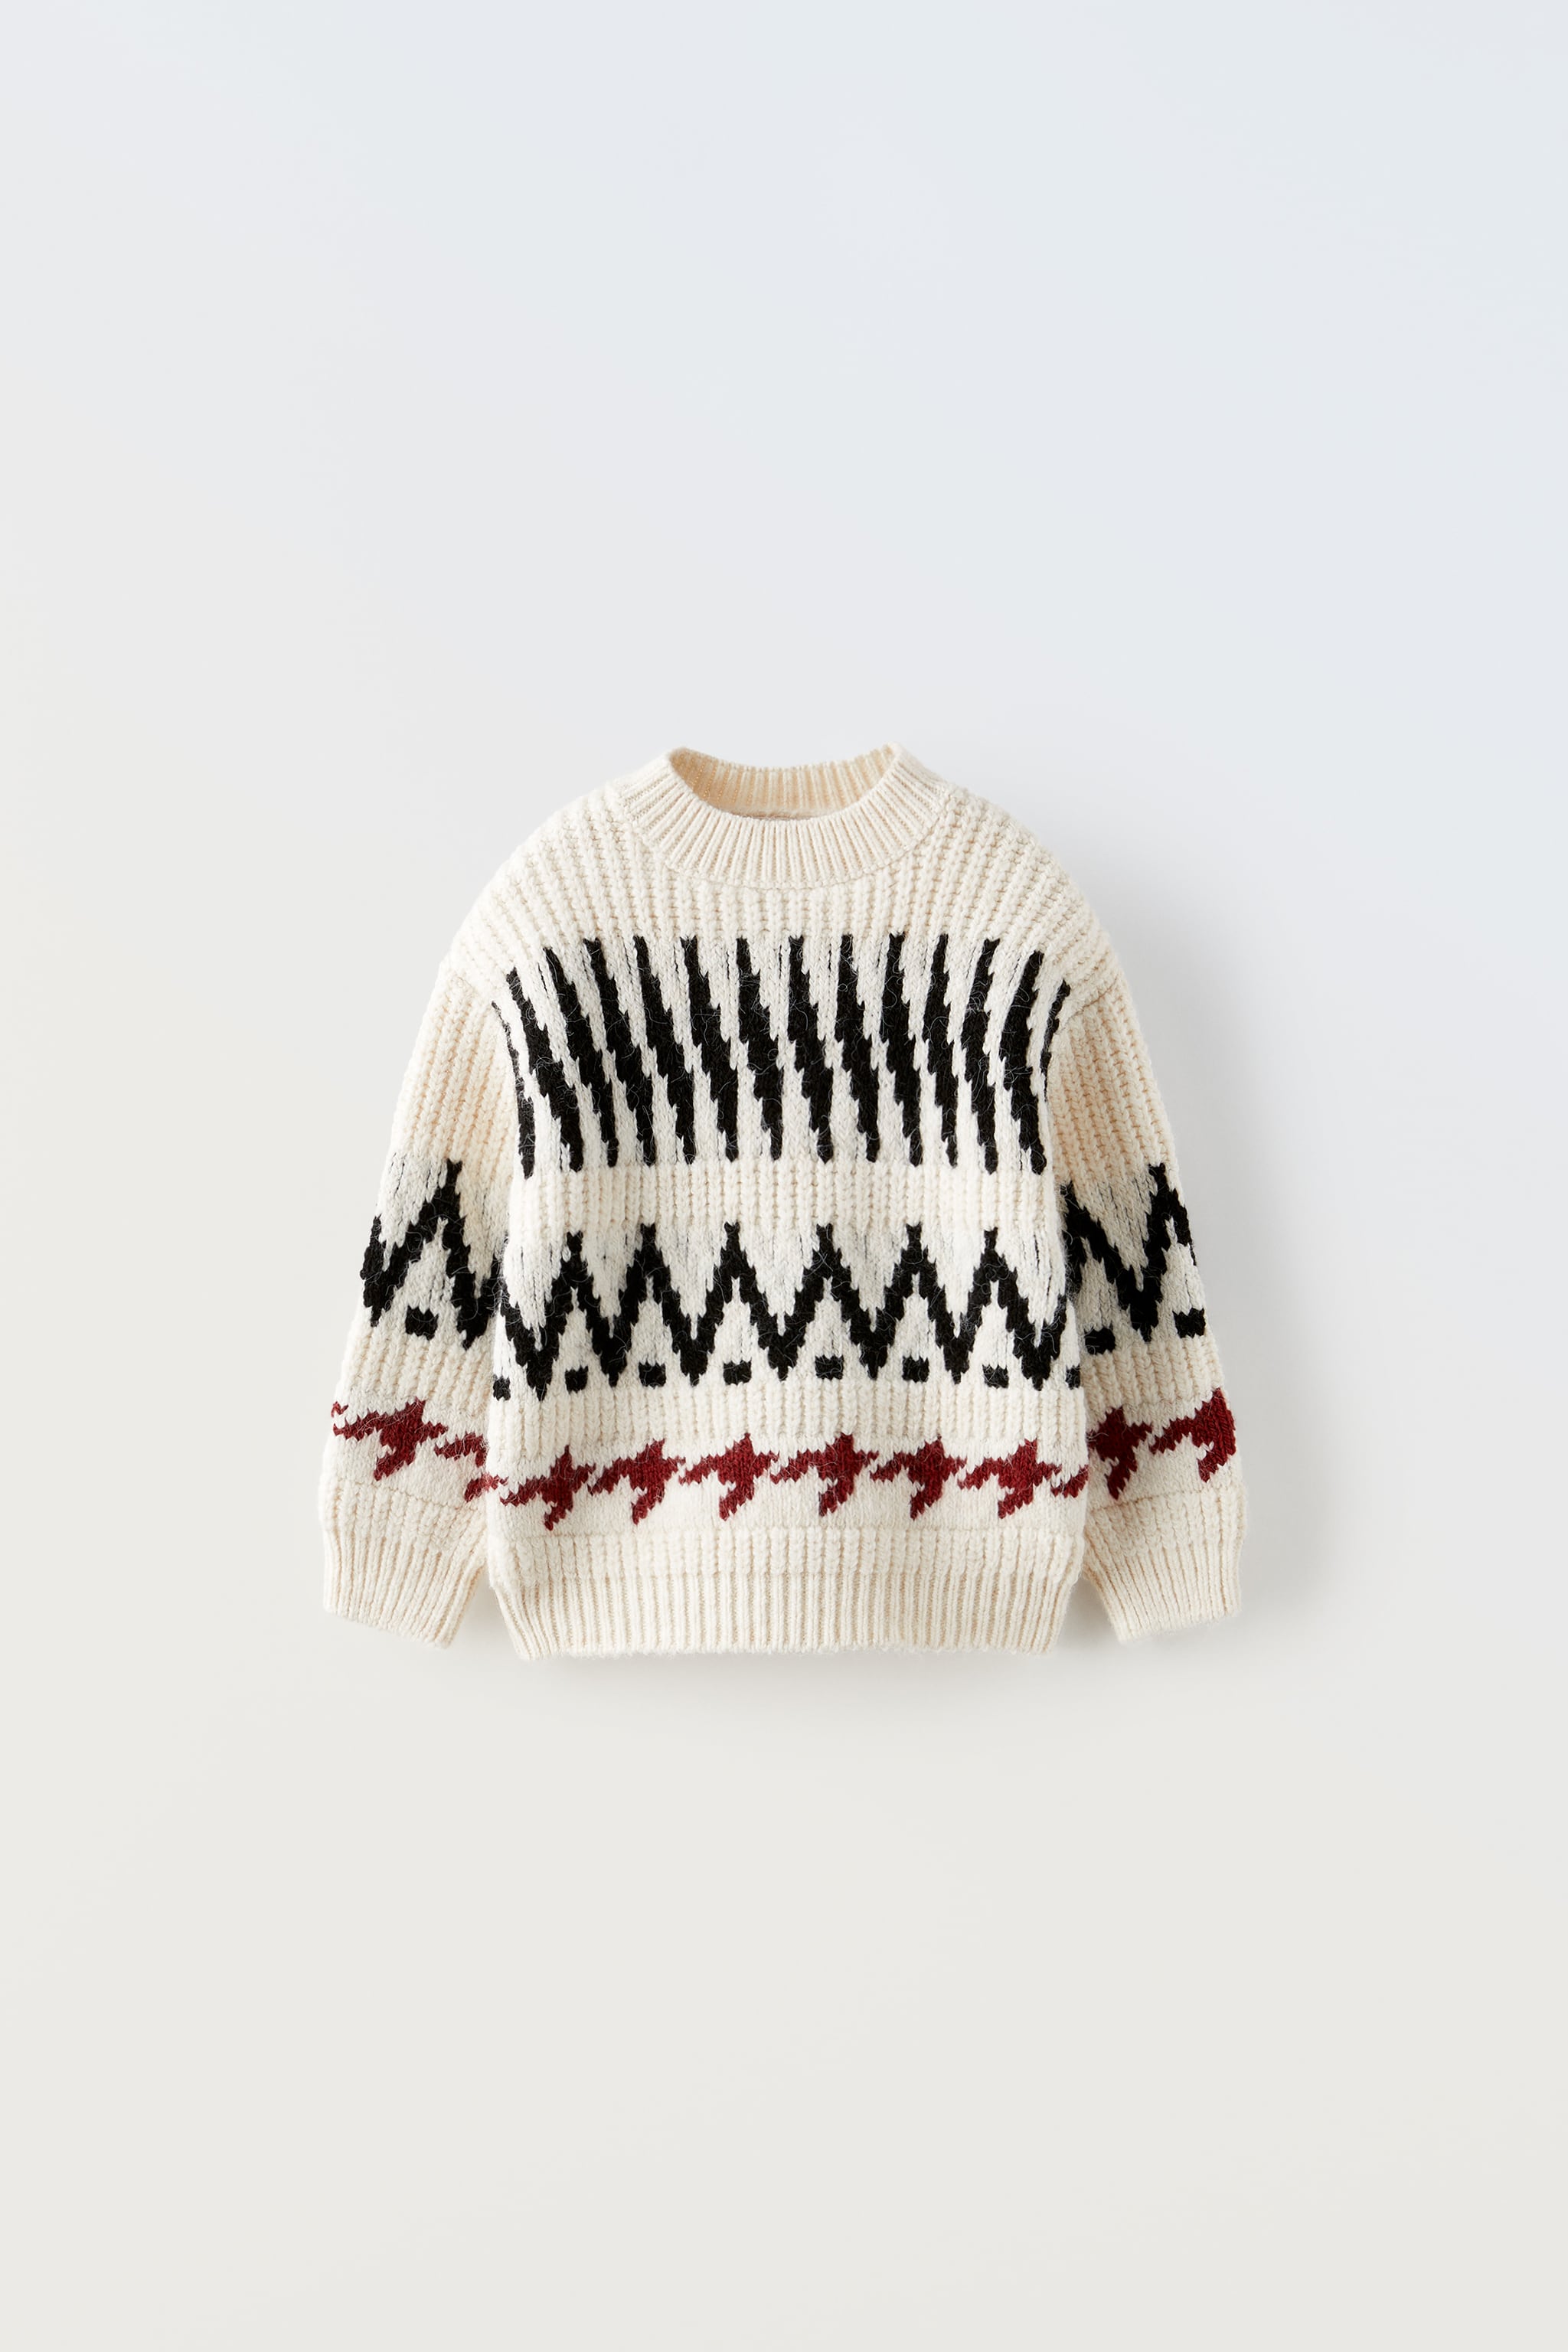 PRINTED KNIT SWEATER SKI COLLECTION